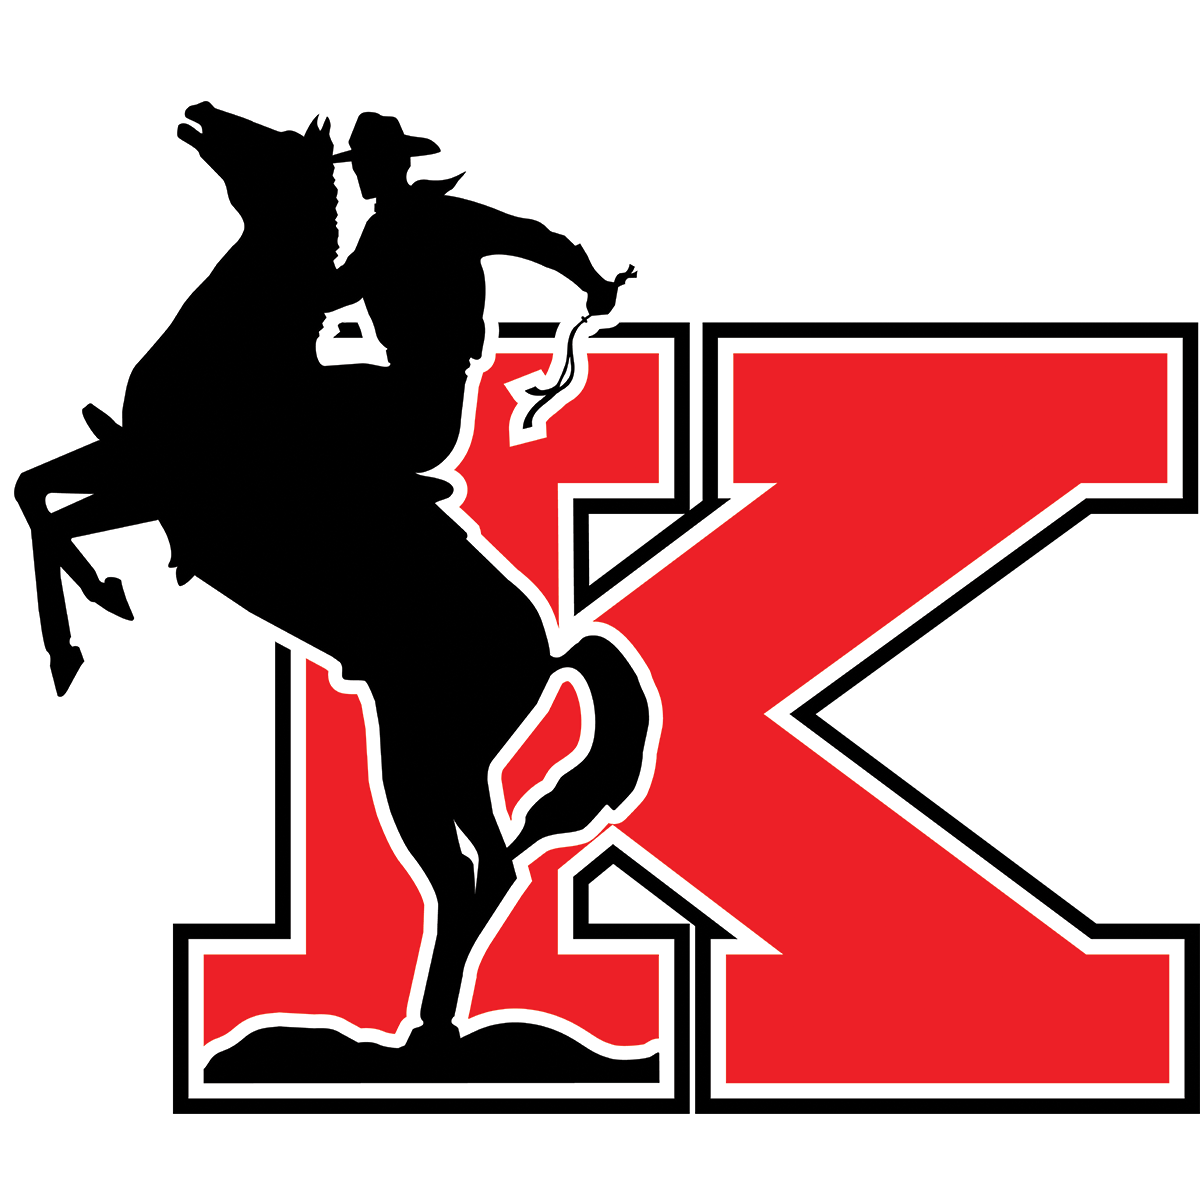 Kent City Riders logo - red K with silhouette of cowboy on rearing horse